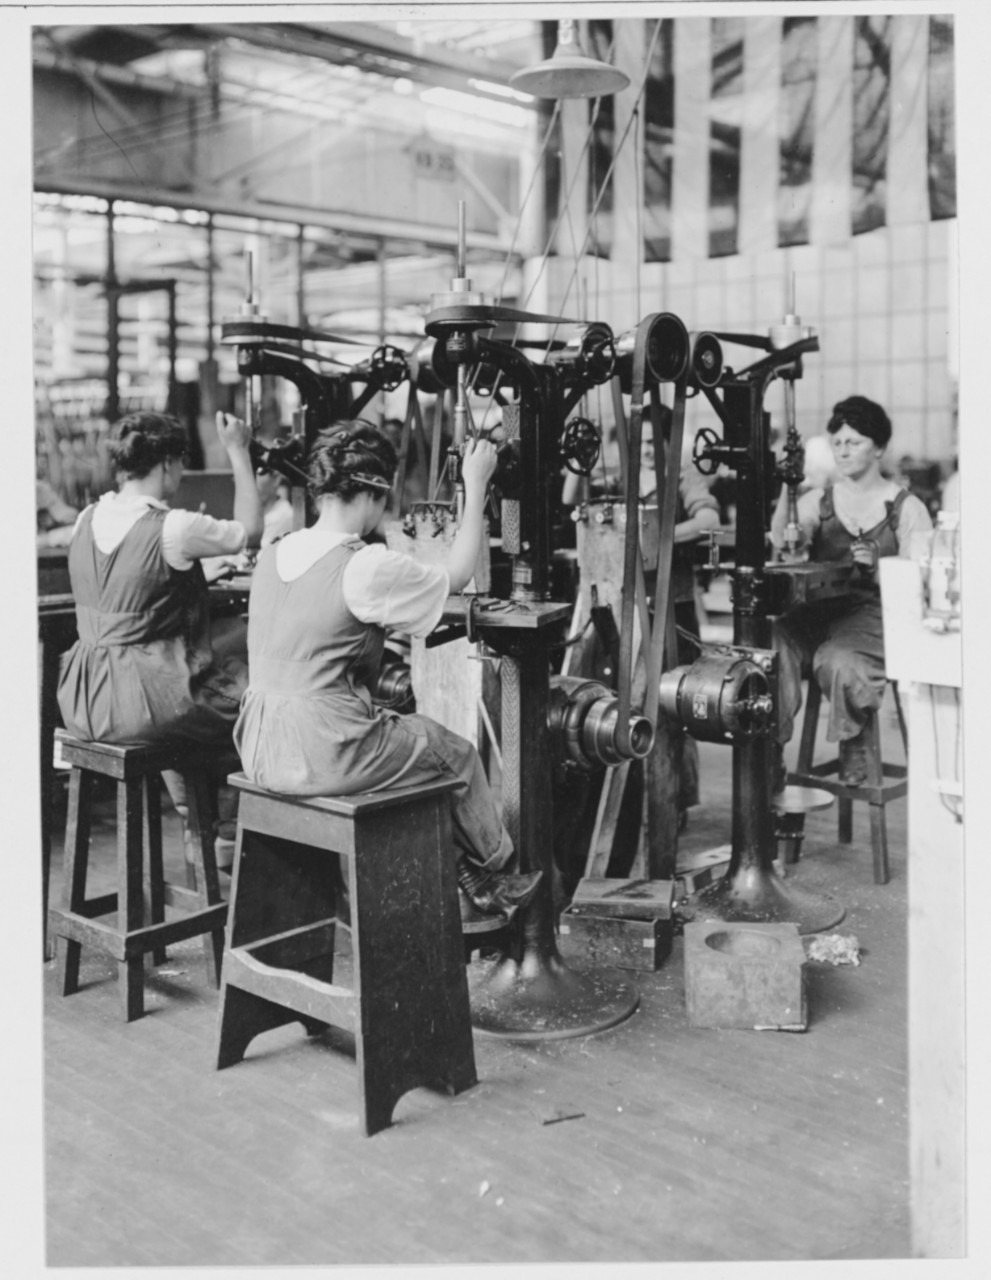 Women workers running drill presses